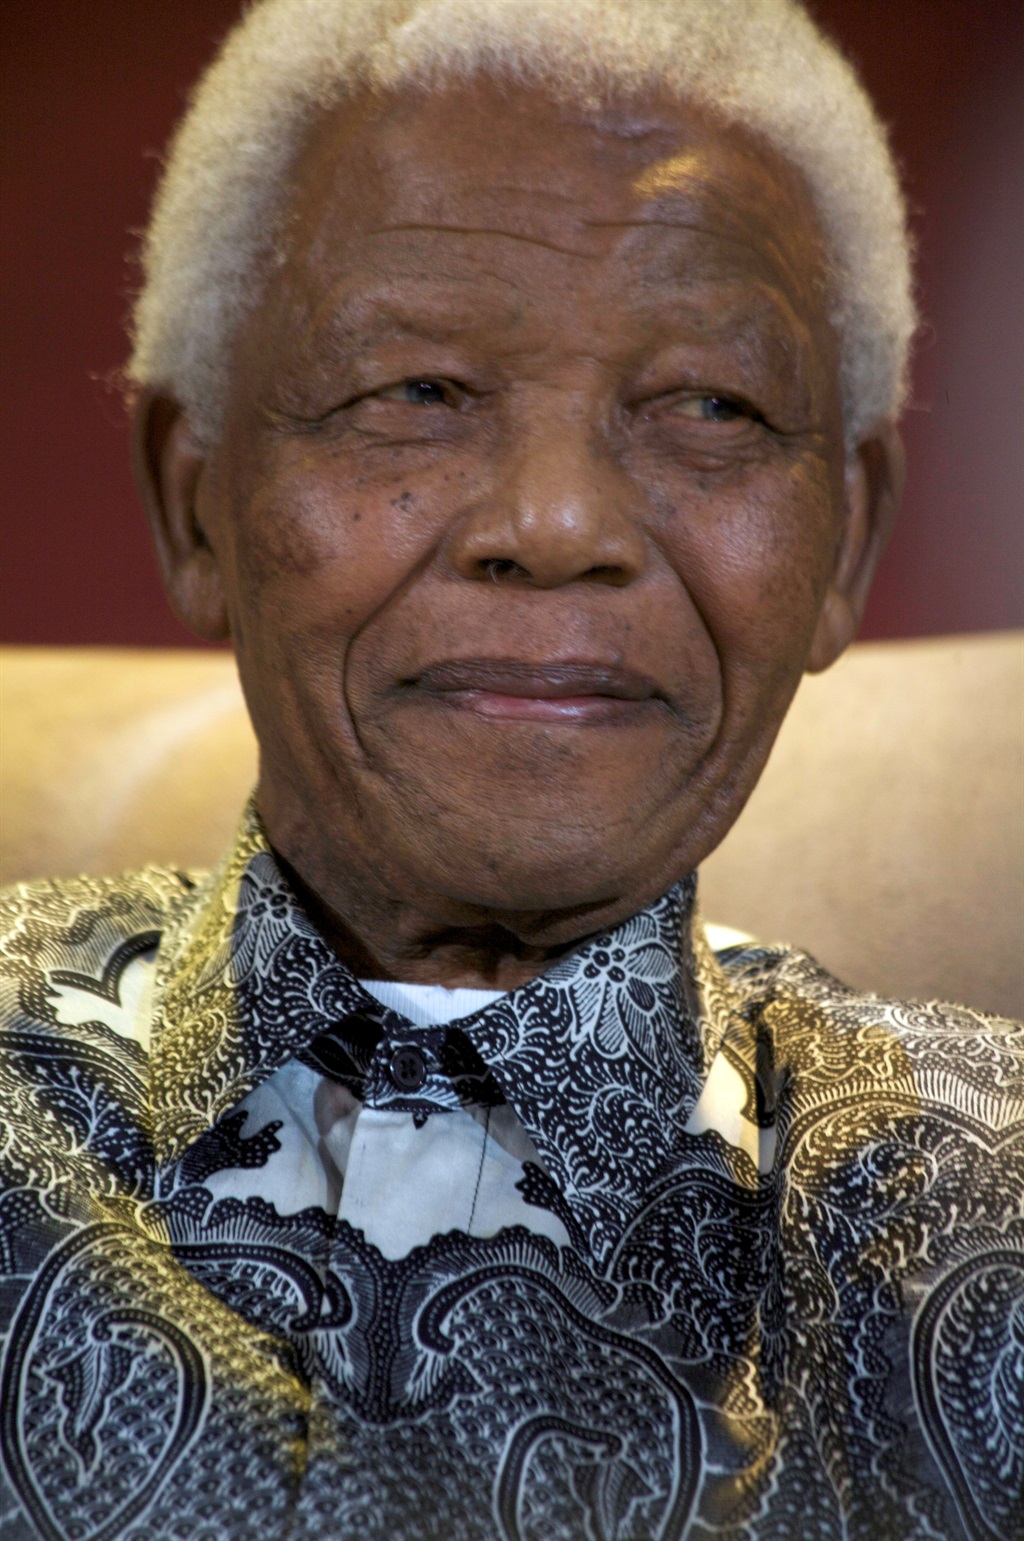 Former president Nelson Mandela died on 5 December 2013, aged 95. Photo by Gallo Images